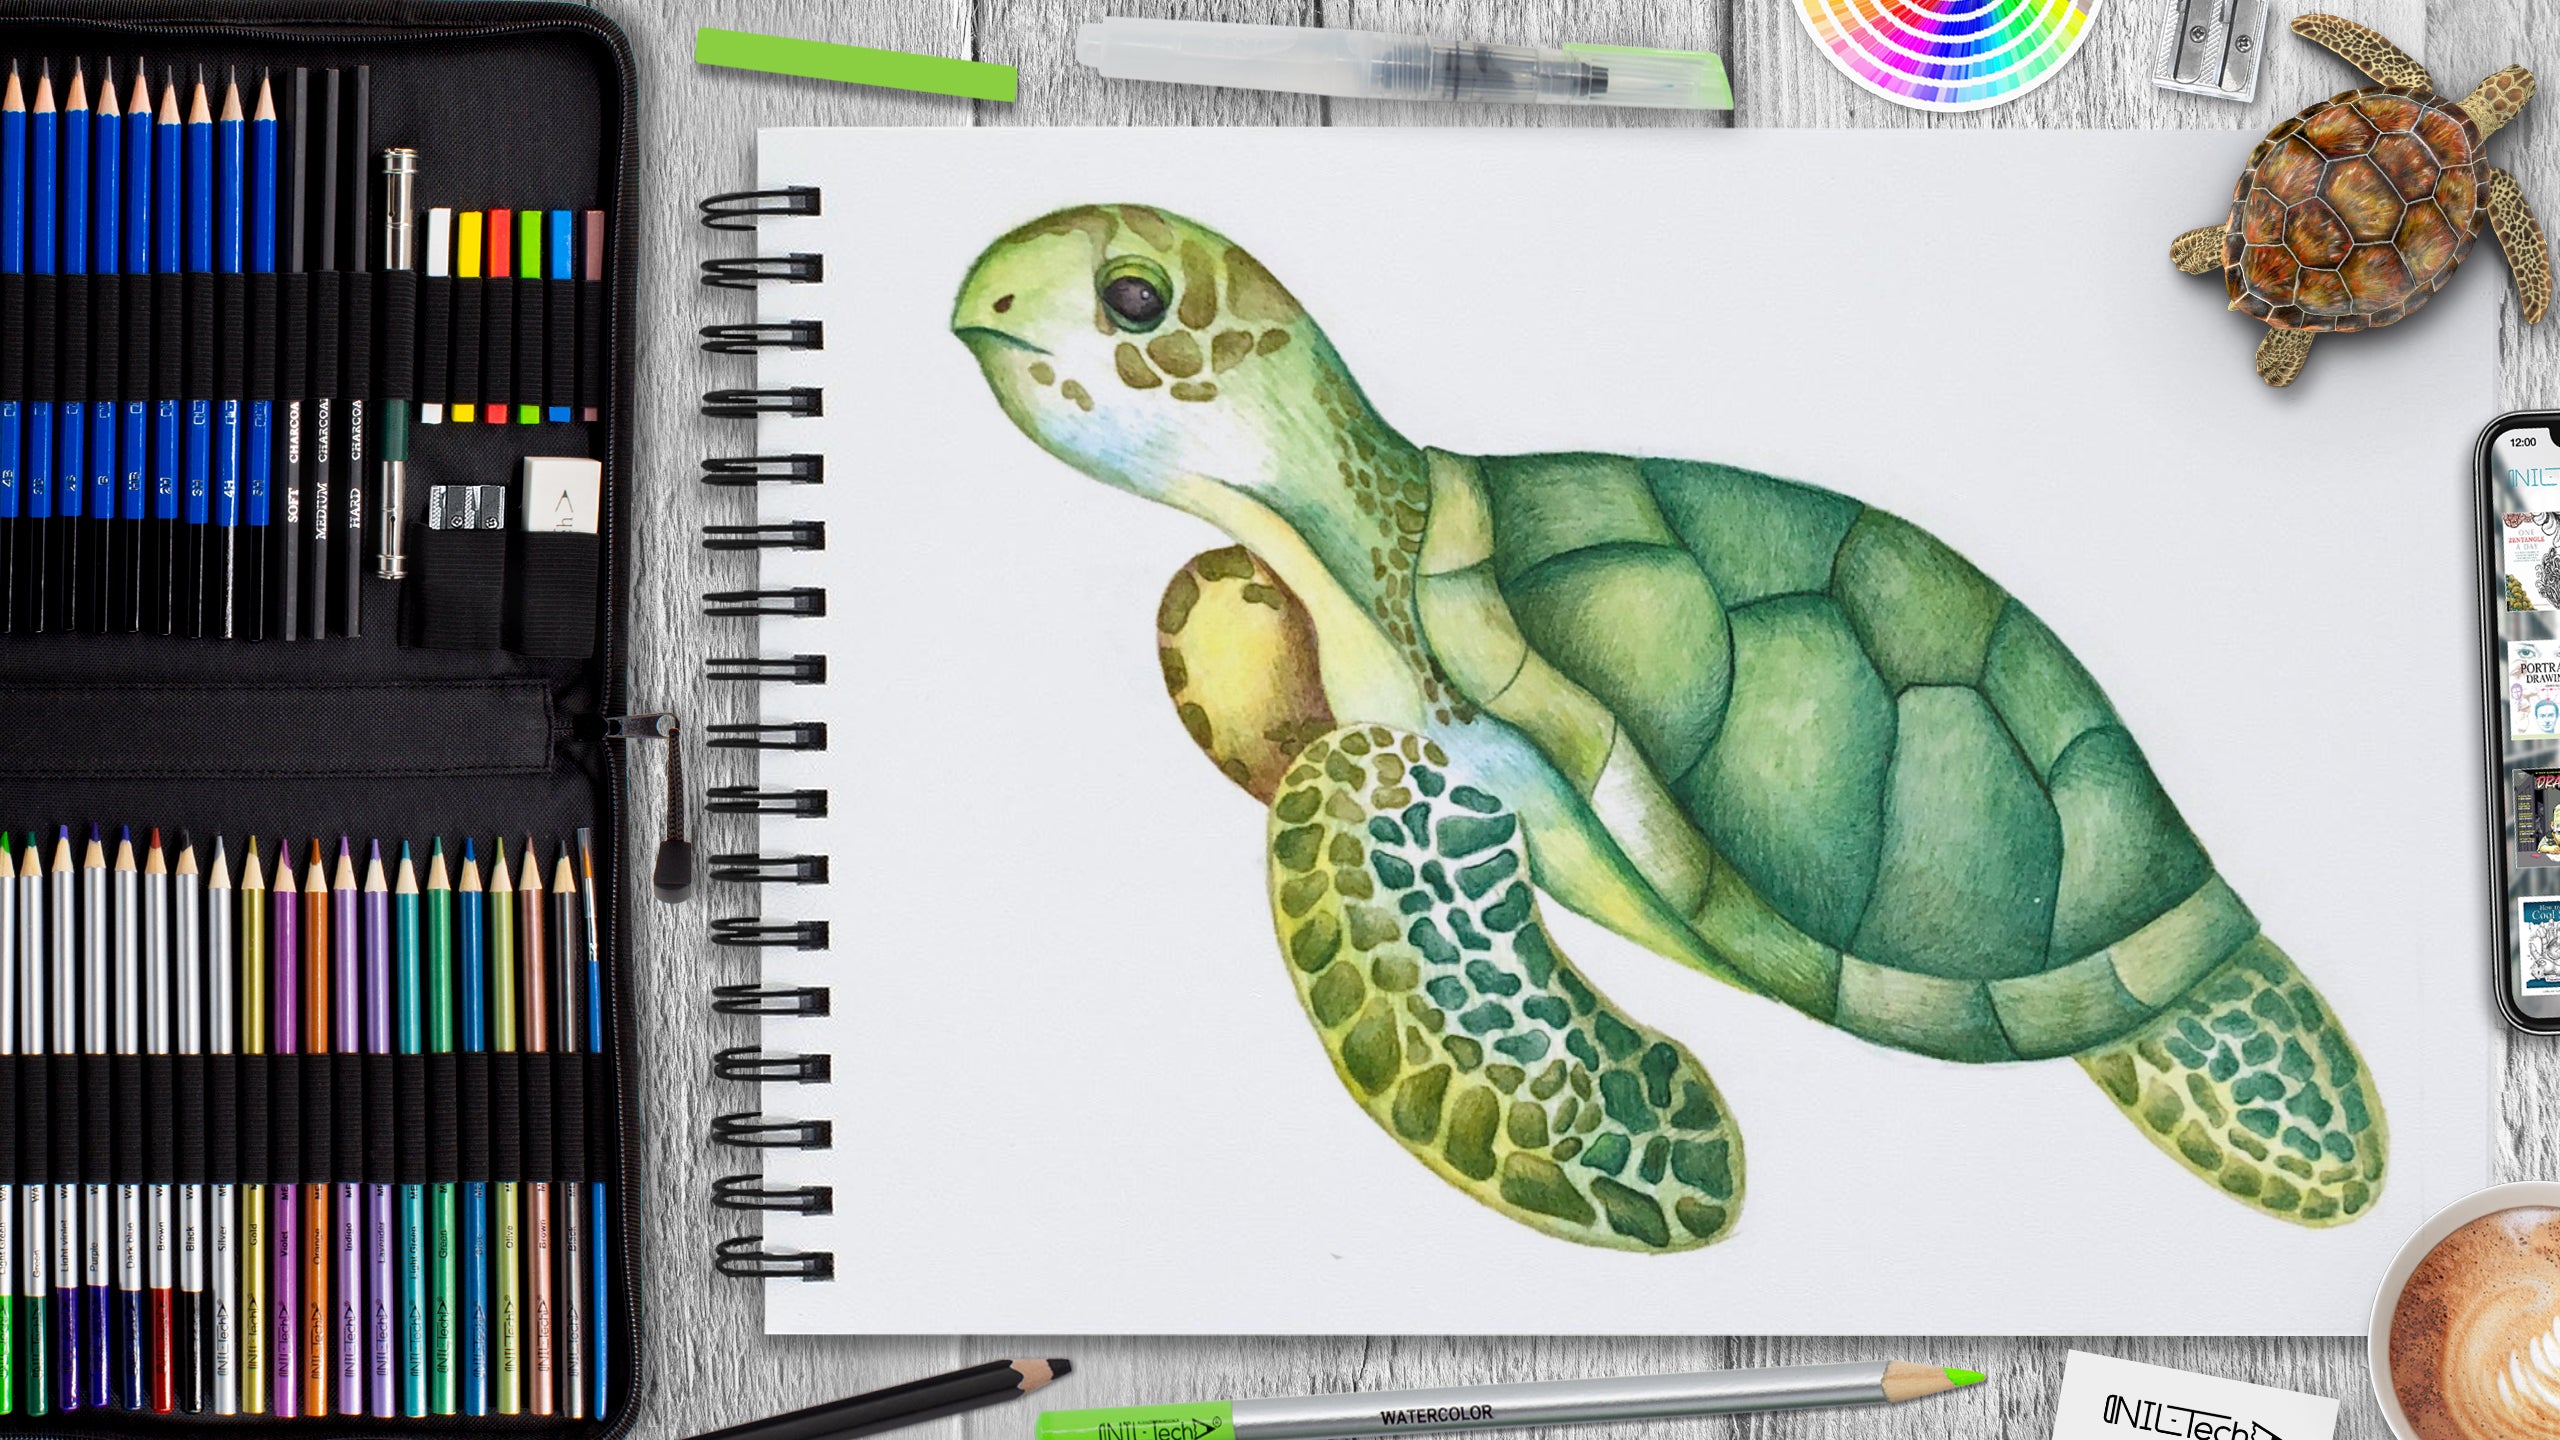 how to draw a simple sea turtle